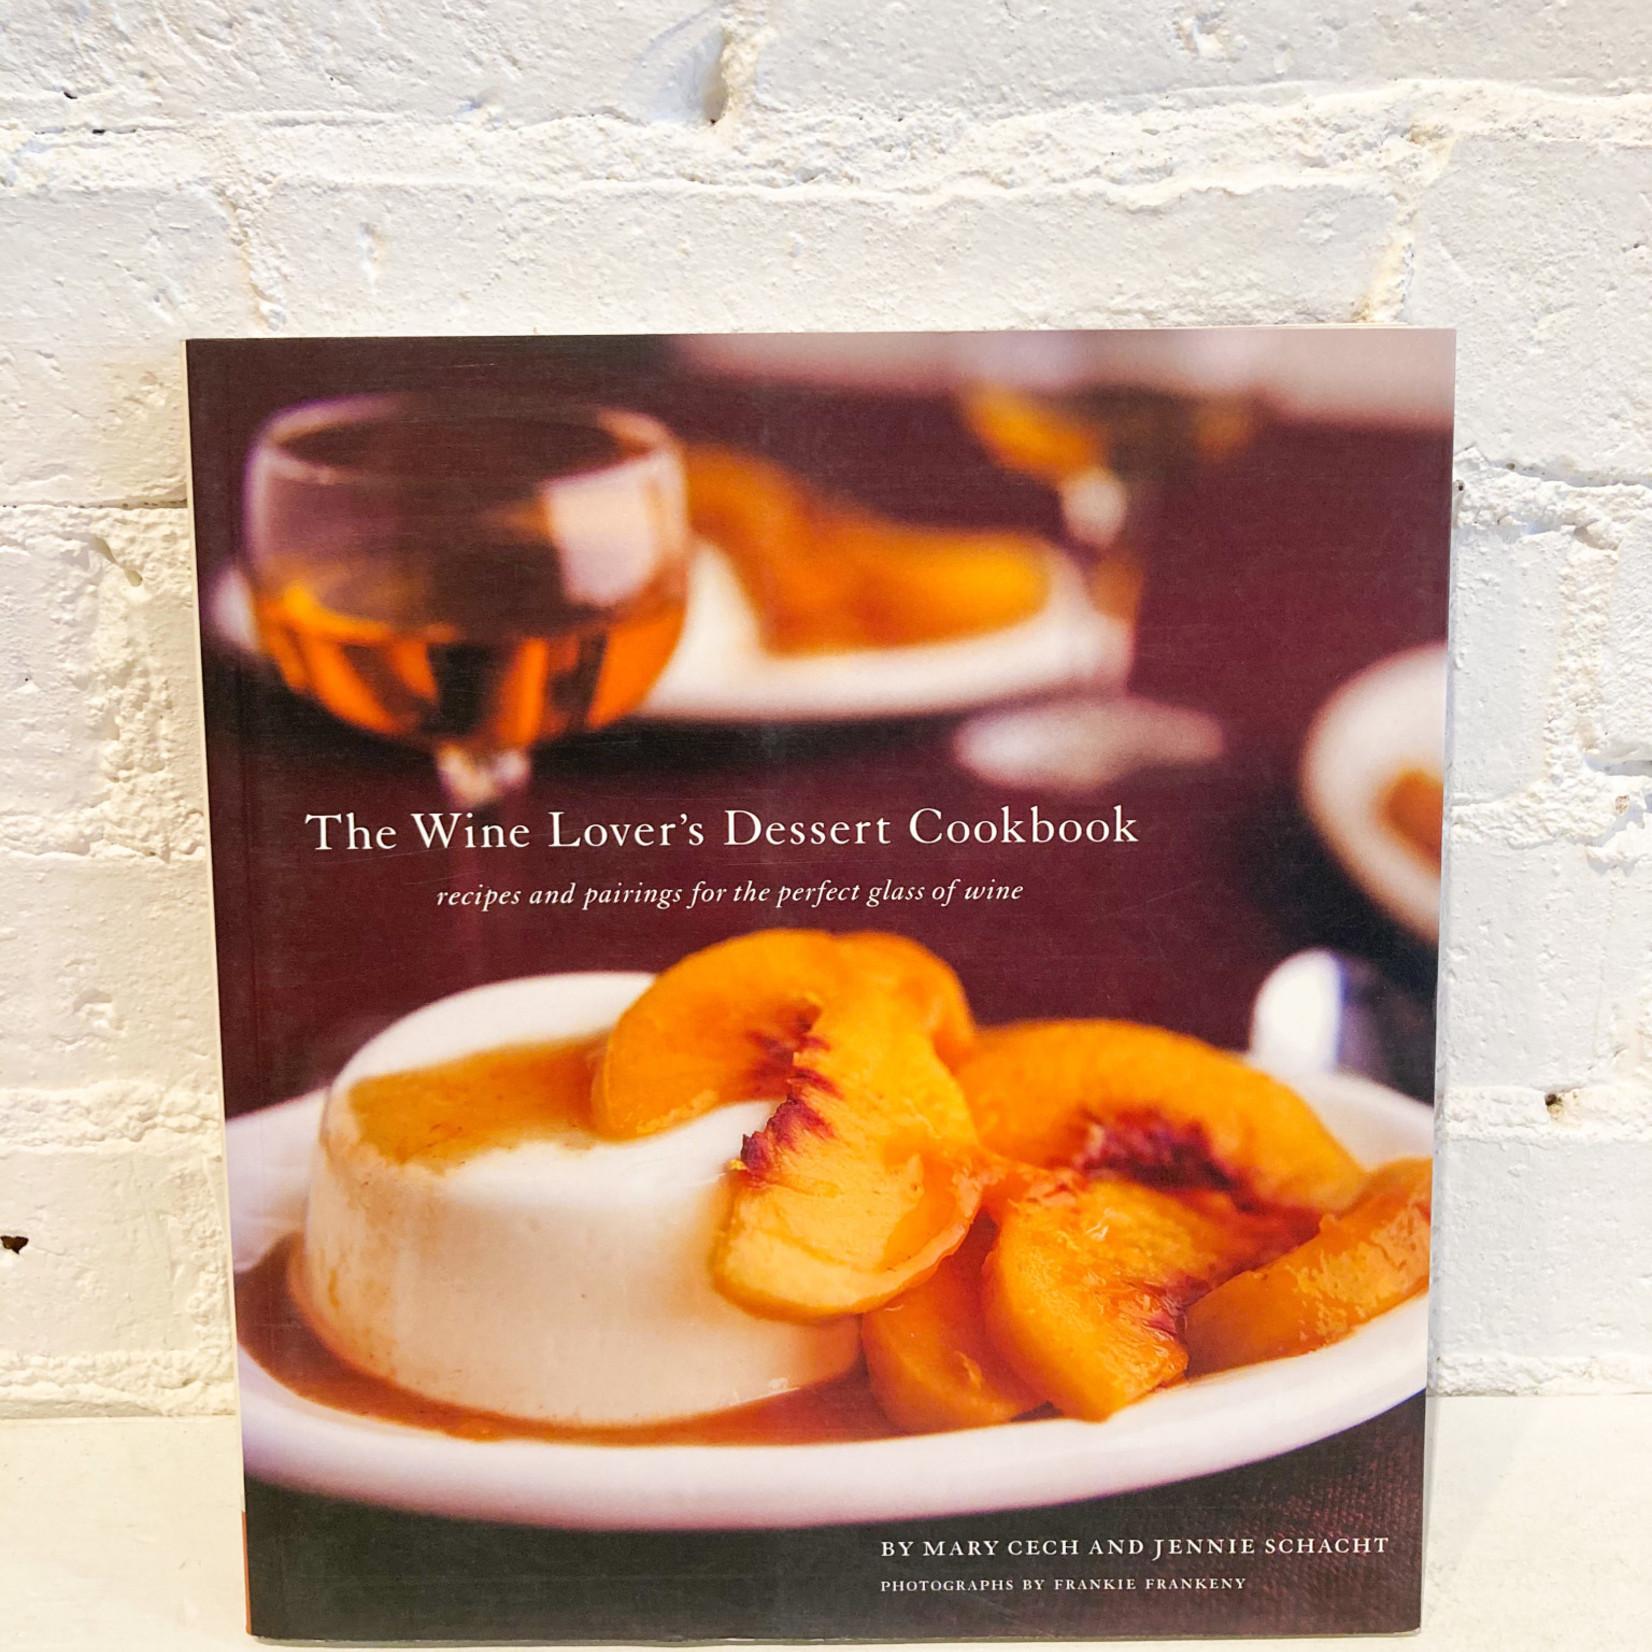 The Wine Lover's Dessert Cookbook by Mary Cech and Jennie Schacht